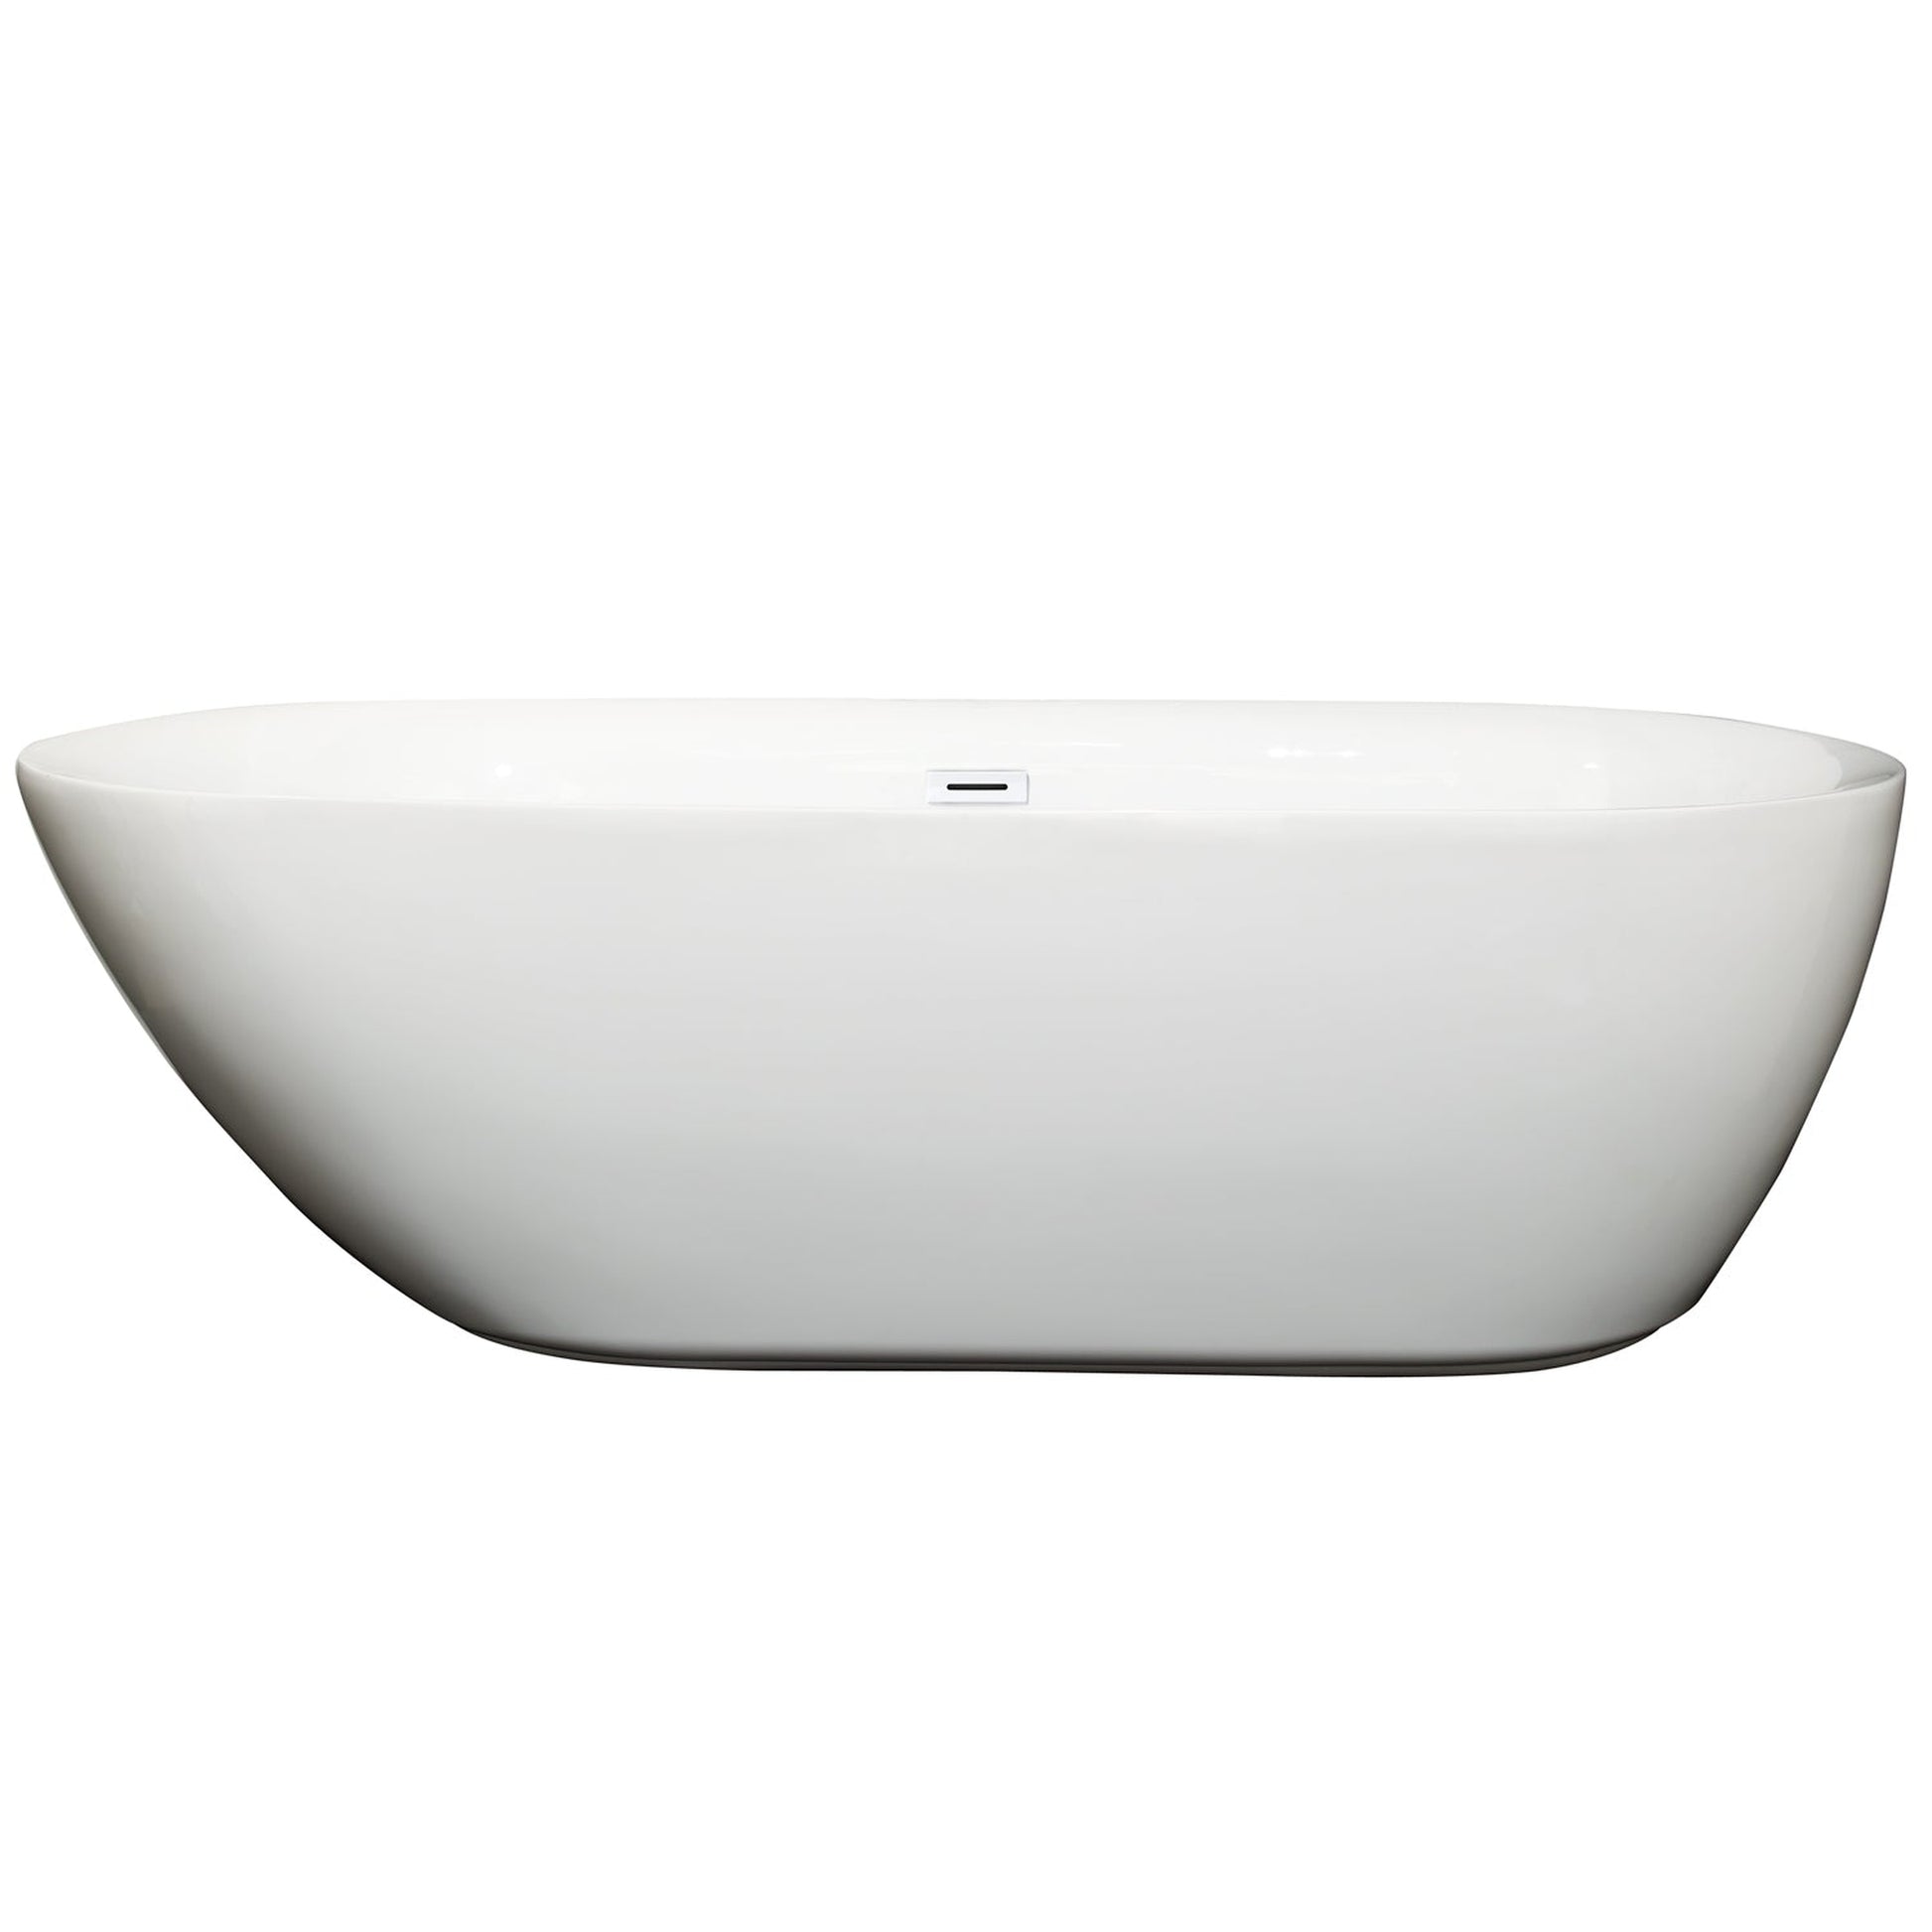 Wyndham Collection Melissa 71" Freestanding Bathtub in White With Shiny White Drain and Overflow Trim